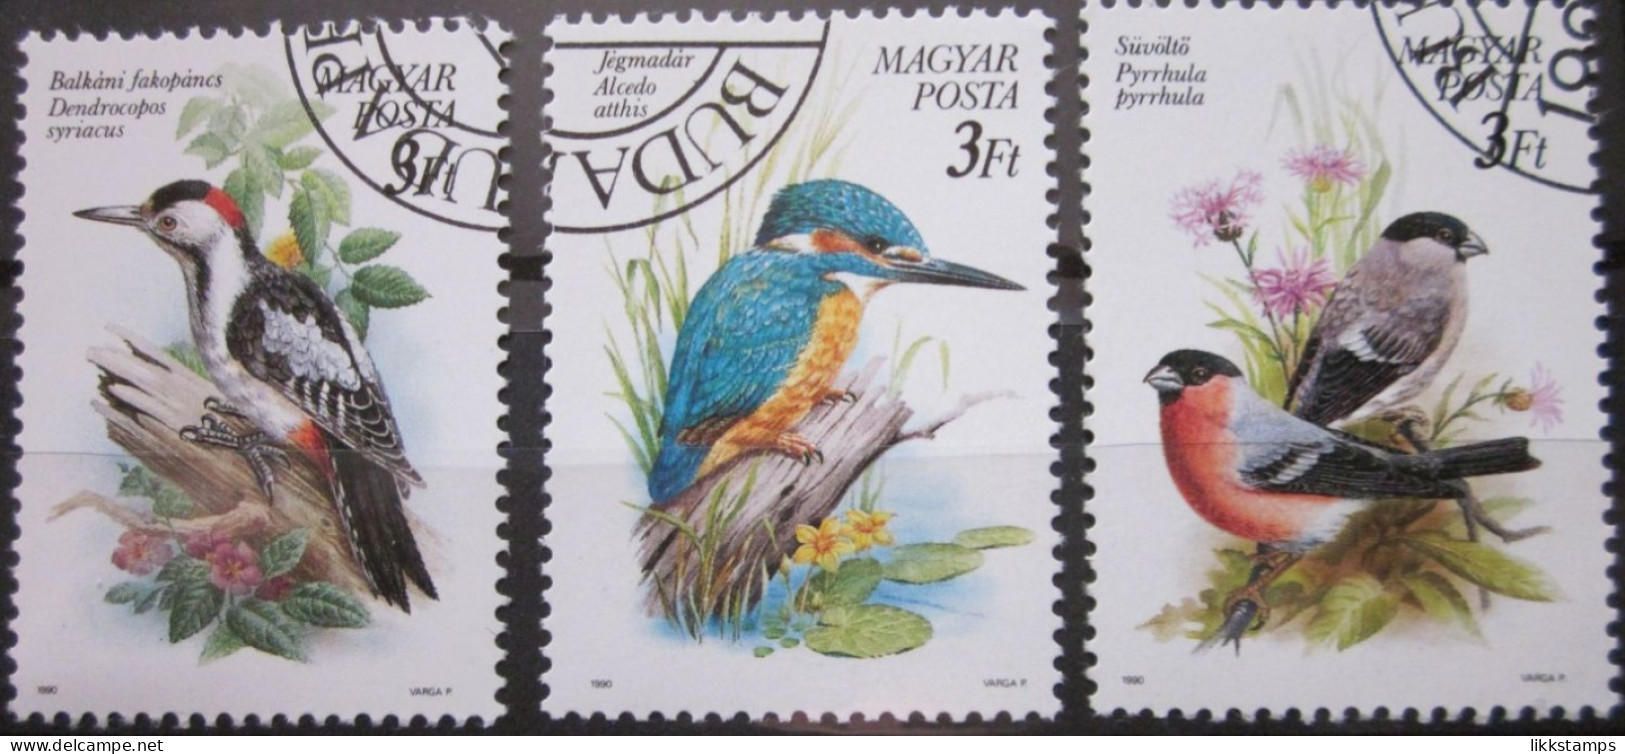 HUNGARY ~ 1990 ~ S.G. NUMBERS 3960 - 3962, ~ BIRDS. ~ VFU #02788 - Used Stamps